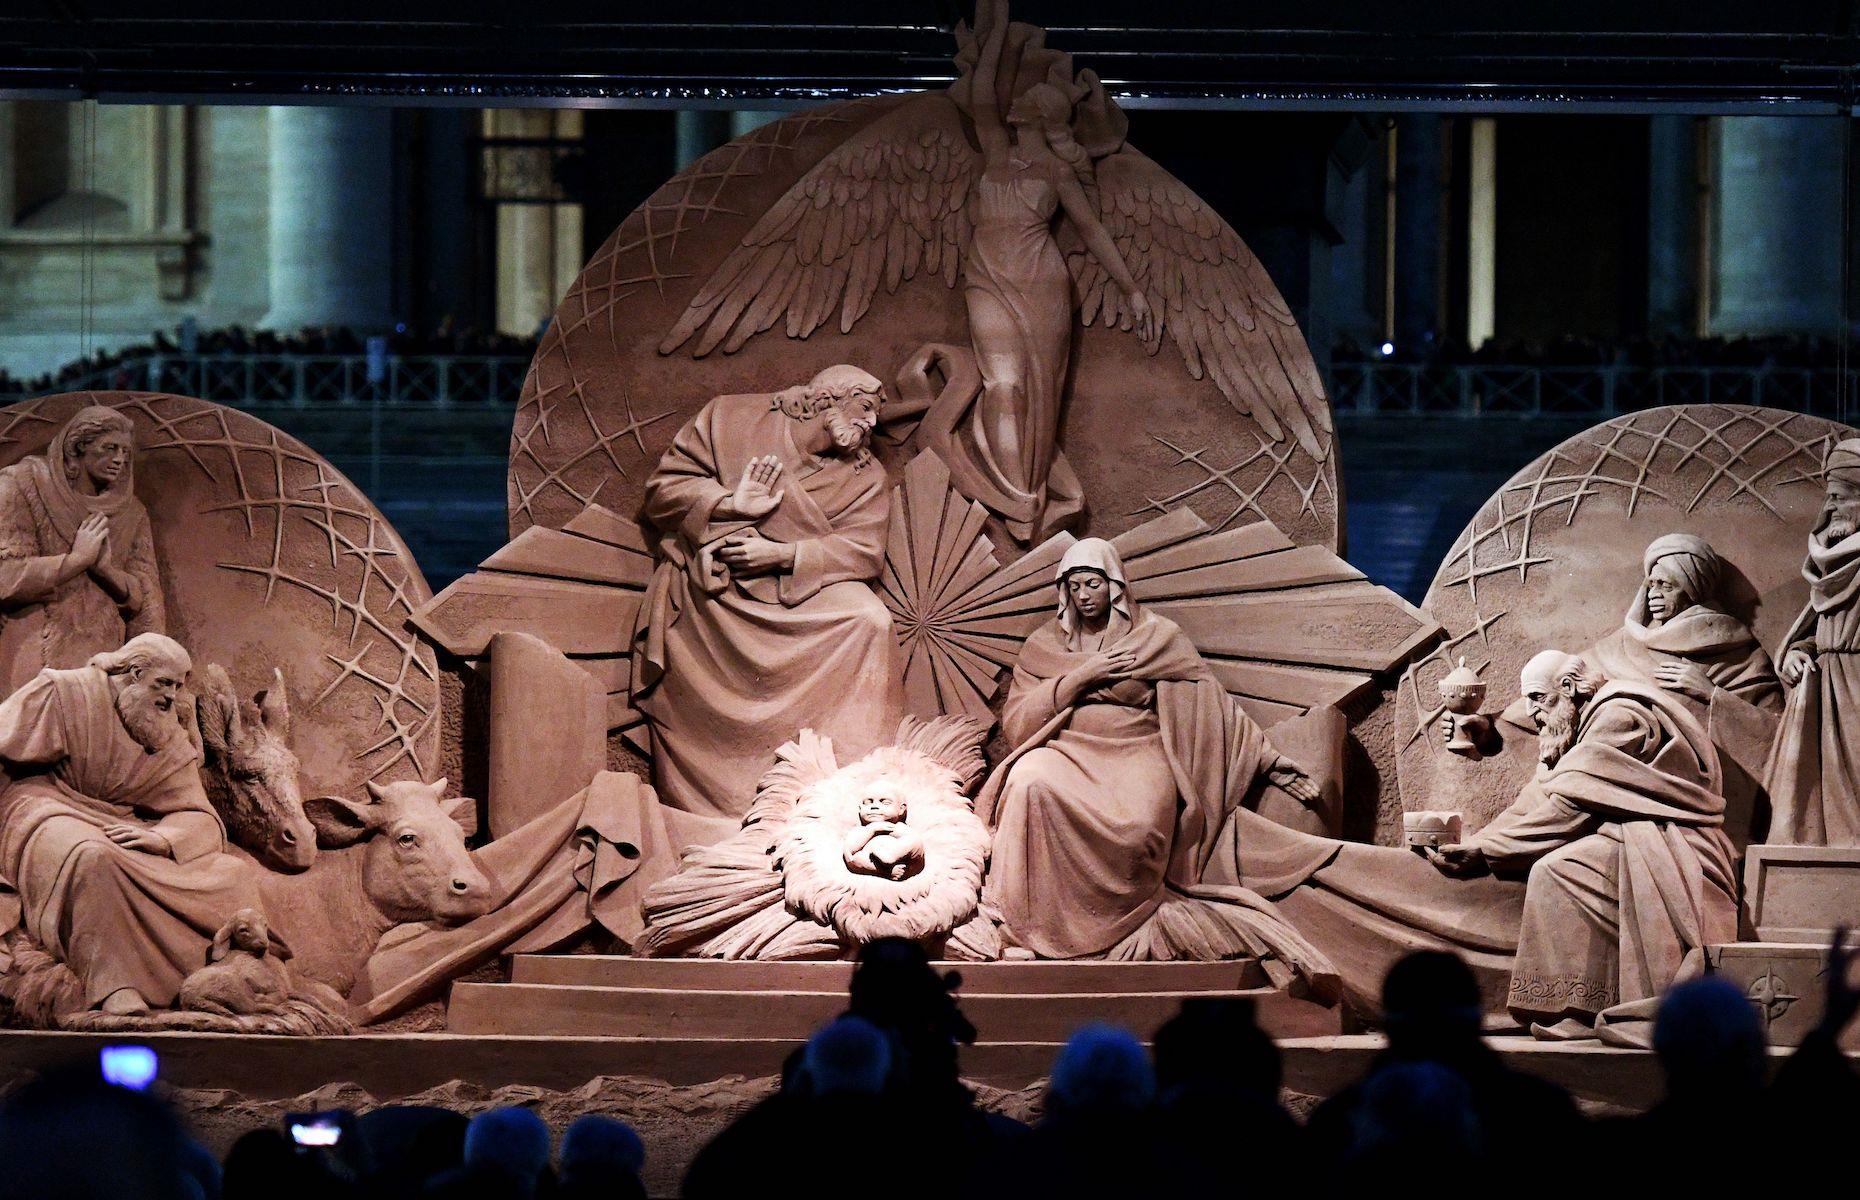 An arresting nativity scene graced St Peter’s Square at the Vatican in 2018, made all the special by the fact it was made entirely from sand and water. It was the work of sand artist Rich Varano and three sculptors: Radovan Zivny, Susanne Ruseler and Ilya Filimontsev. The impressive team used 720 tons of sand sourced from Jesolo near Venice. The sculpture was 18 feet (5.5m) high and 52 feet (16m) wide.